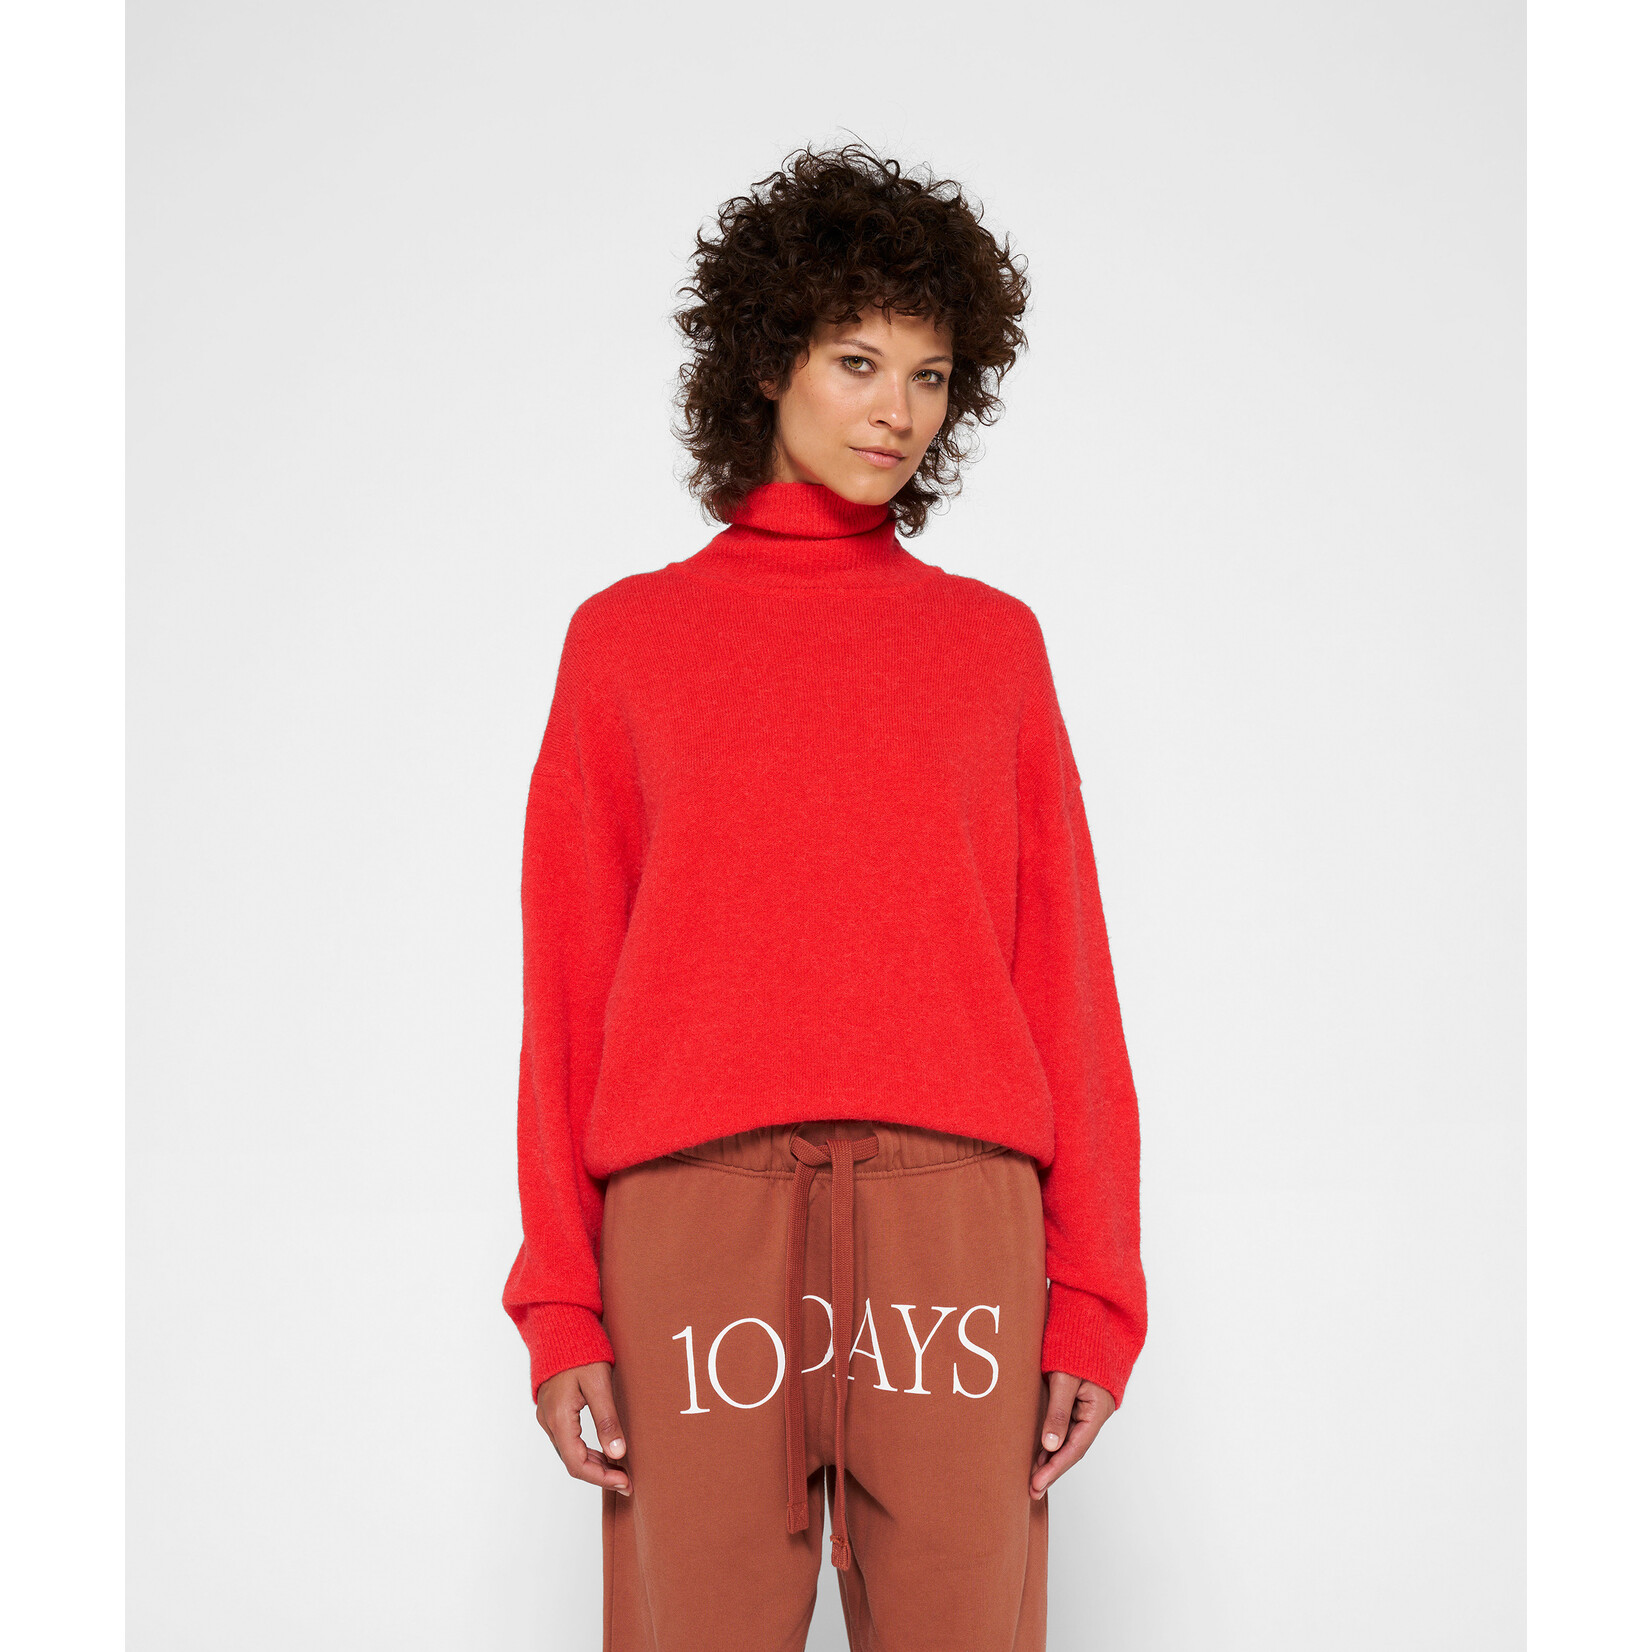 10Days Coll sweater knit Coral red